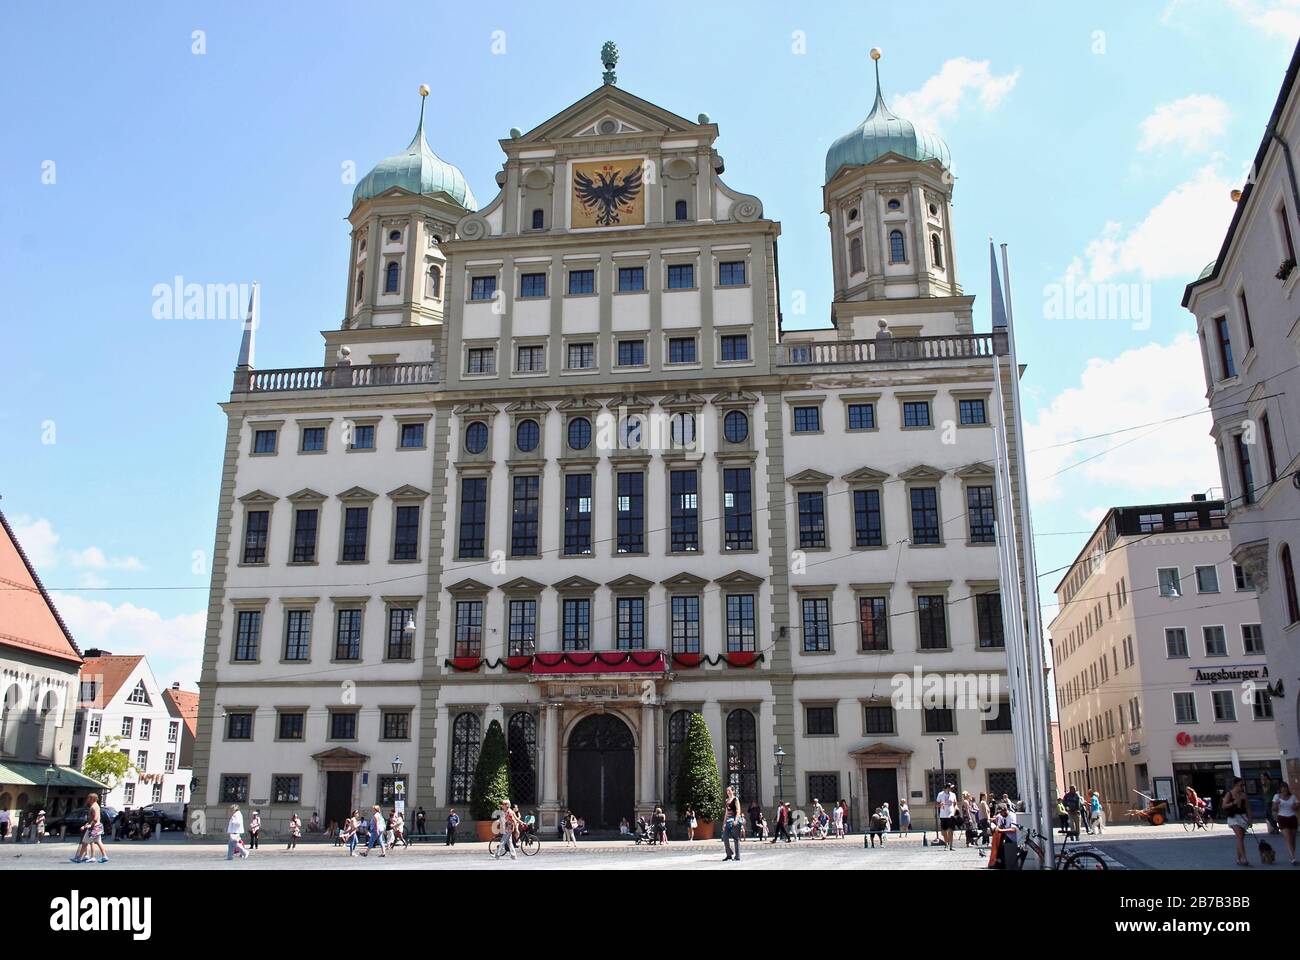 Augsburg, Germany: The Town Hall (Augsburger Rathaus) Topped with the Reichsadler, or Imperial Eagle of the Holy Roman Empire. Stock Photo